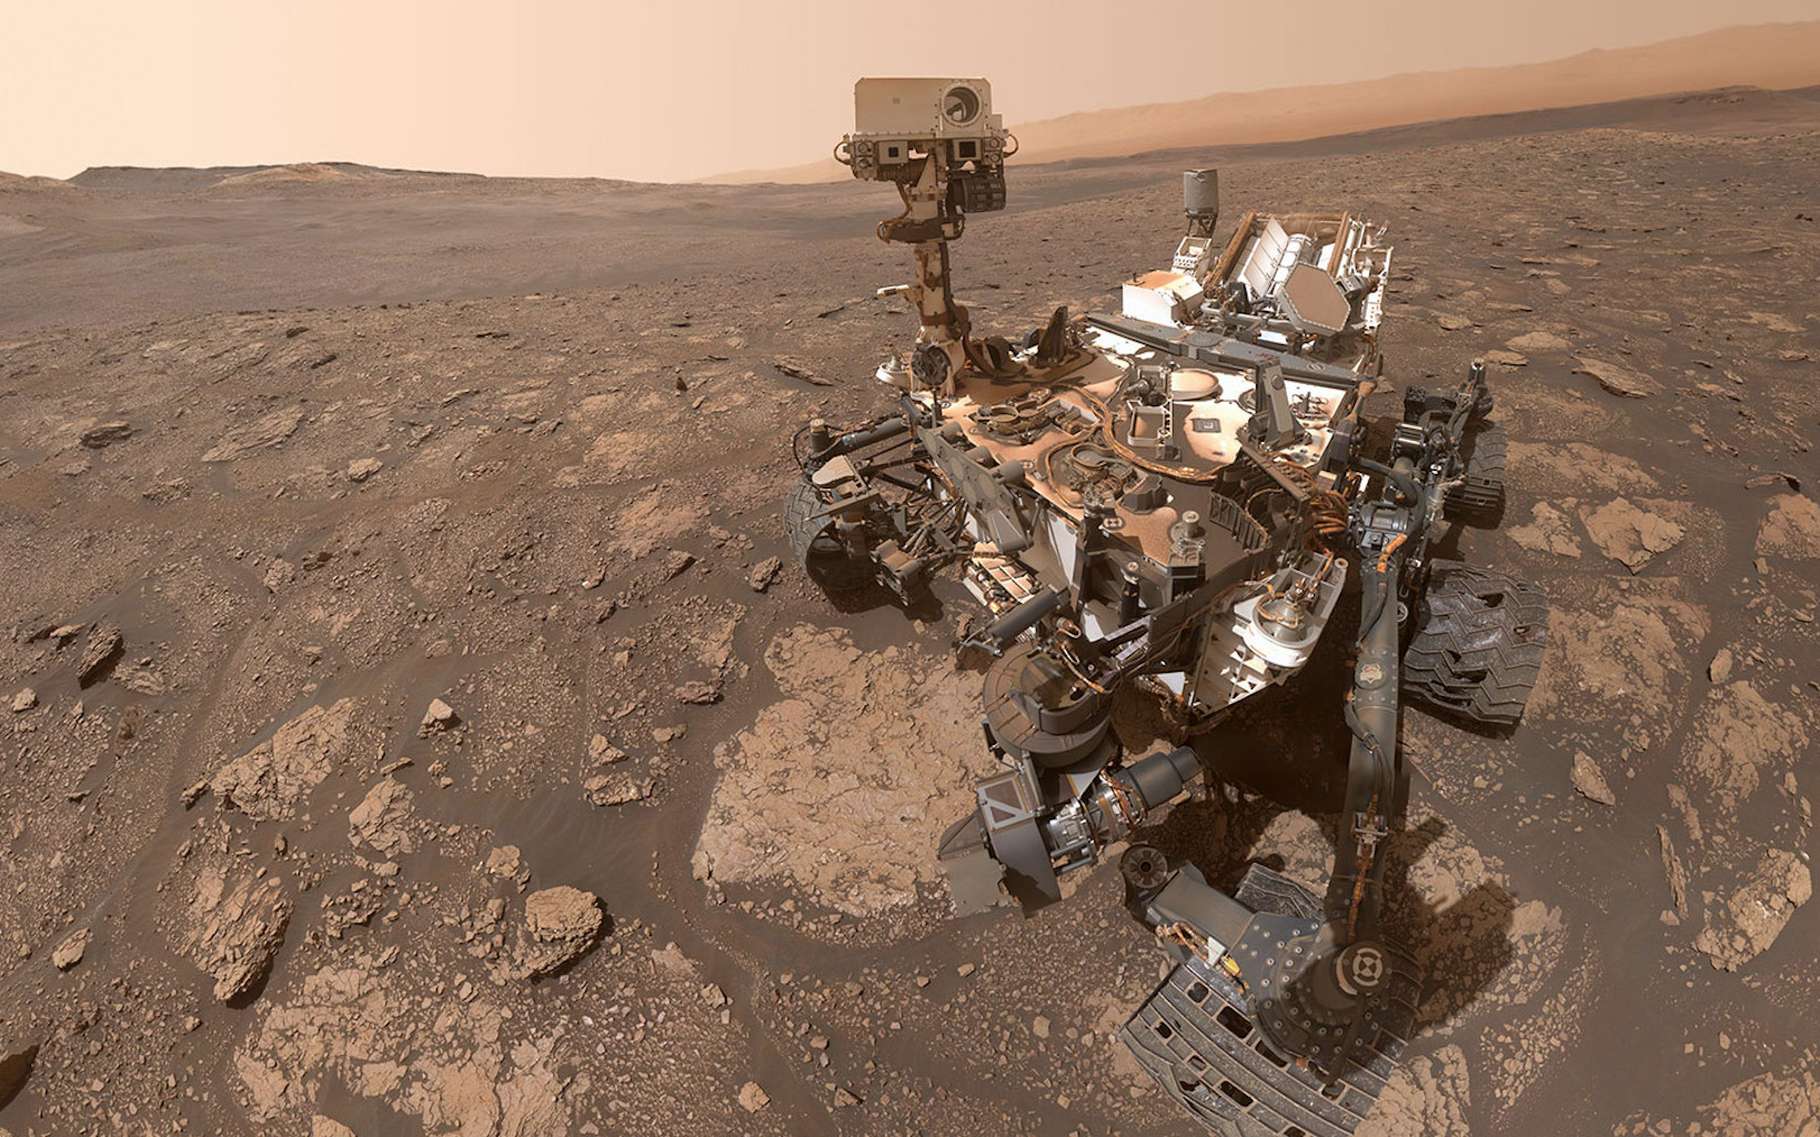 What Curiosity tells us about the composition of Martian soil